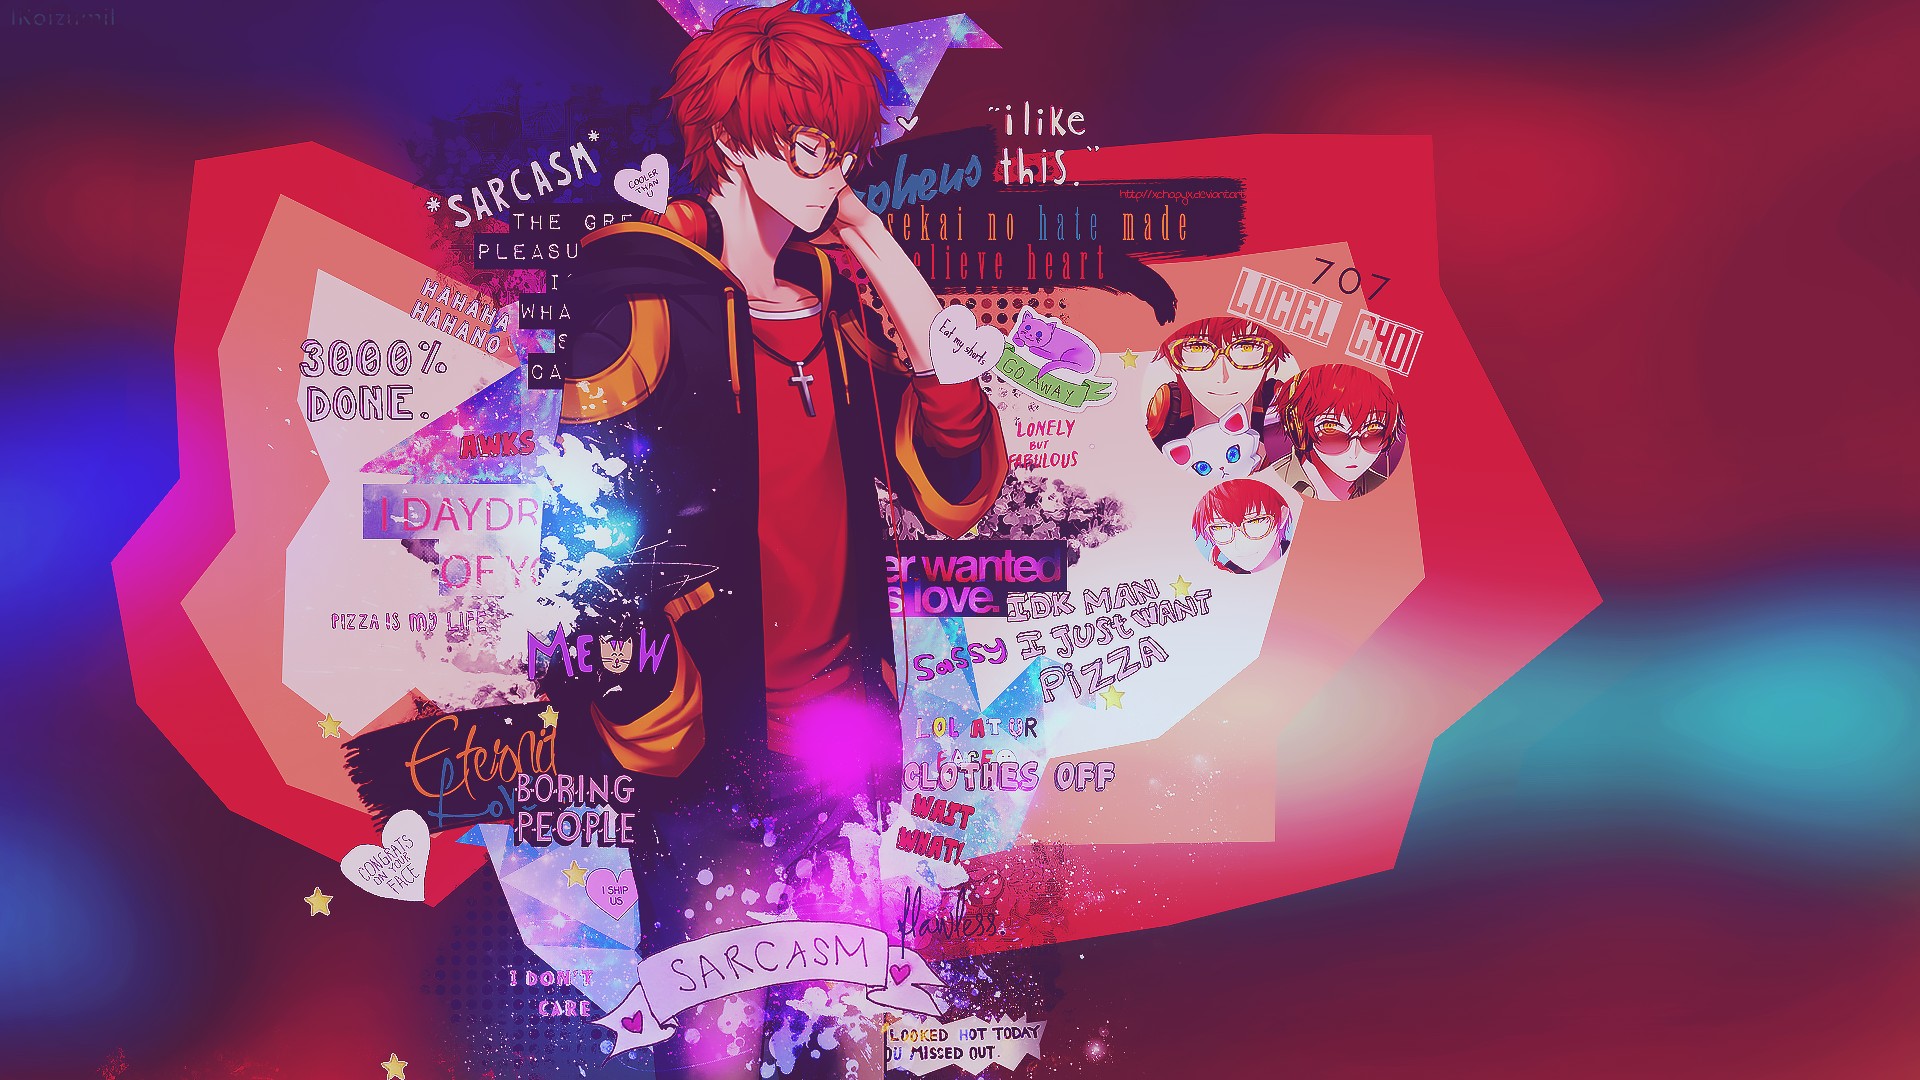 Mystic Messenger Wallpaper Download Free Hd Backgrounds For Desktop Computers And Smartphones In Any Resolution Desktop Android Iphone Ipad 19x1080 480x800 7x1280 19x10 Etc Wallpapertag